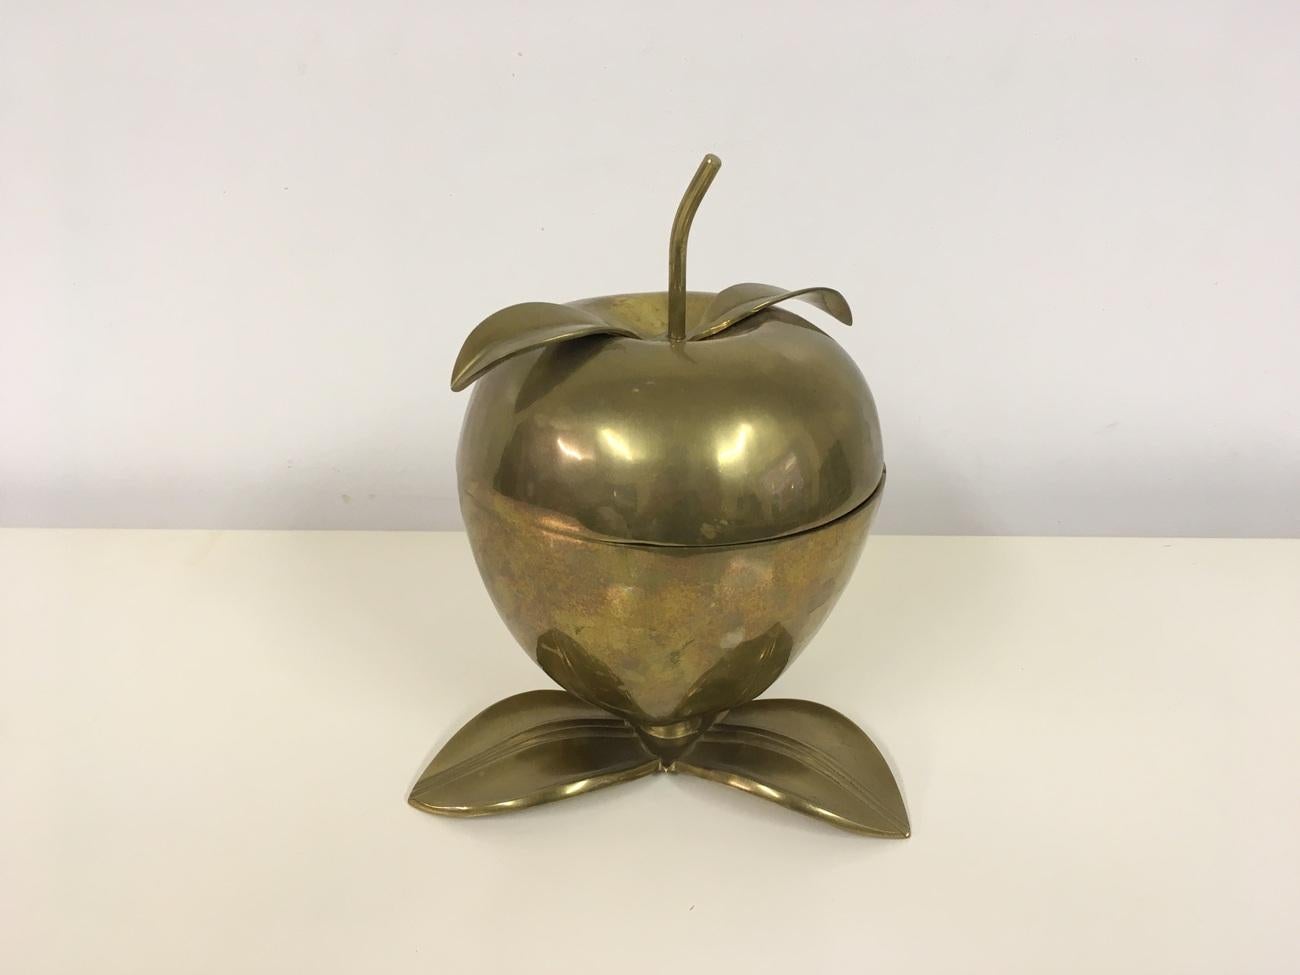 Brass apple shaped bowl
With hinged lid
Ideal for small item storage
France, 1970s.